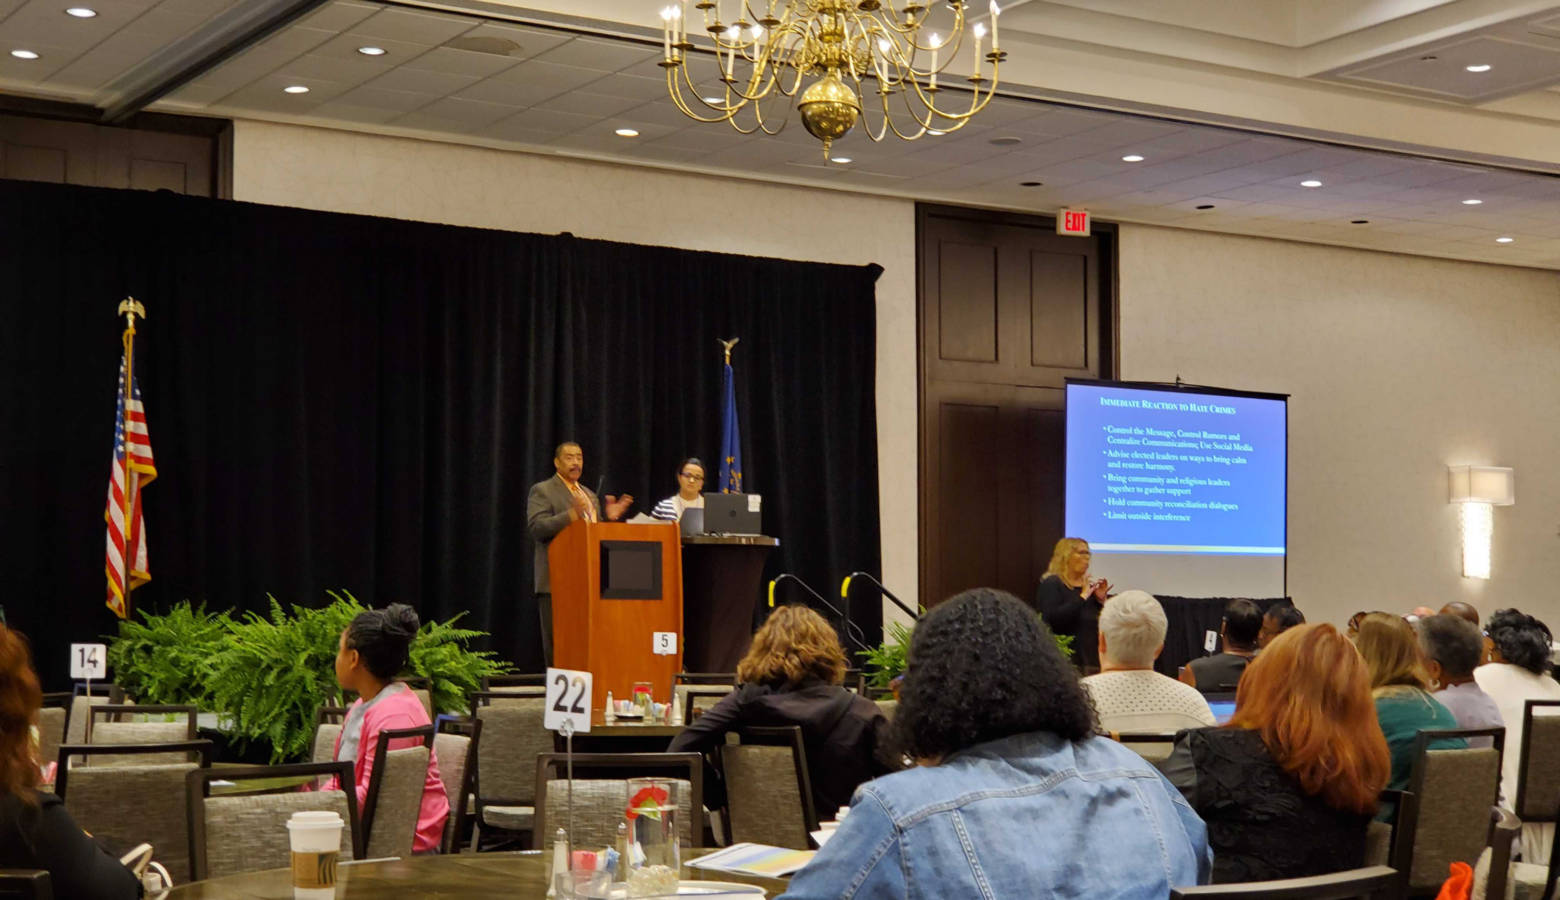 Department of Justice specialist Ken Bergeron and Women4Change Indiana executive director Rima Shahid address an Indiana Civil Rights Commission Conference. (Samantha Horton/IPB News)